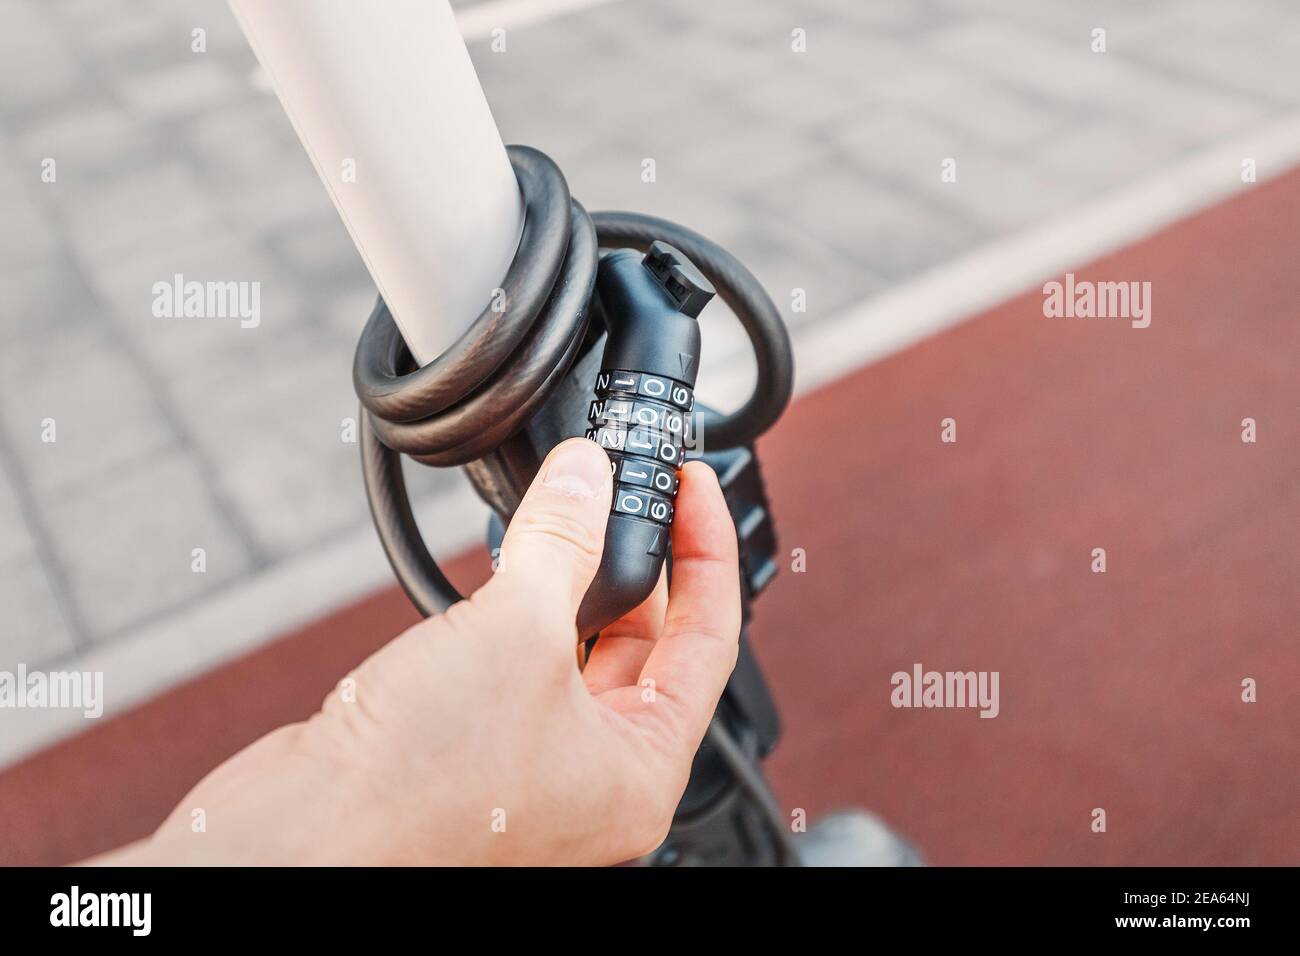 Electric scooter with a combination lock. Anti-theft protection 3259126  Stock Photo at Vecteezy